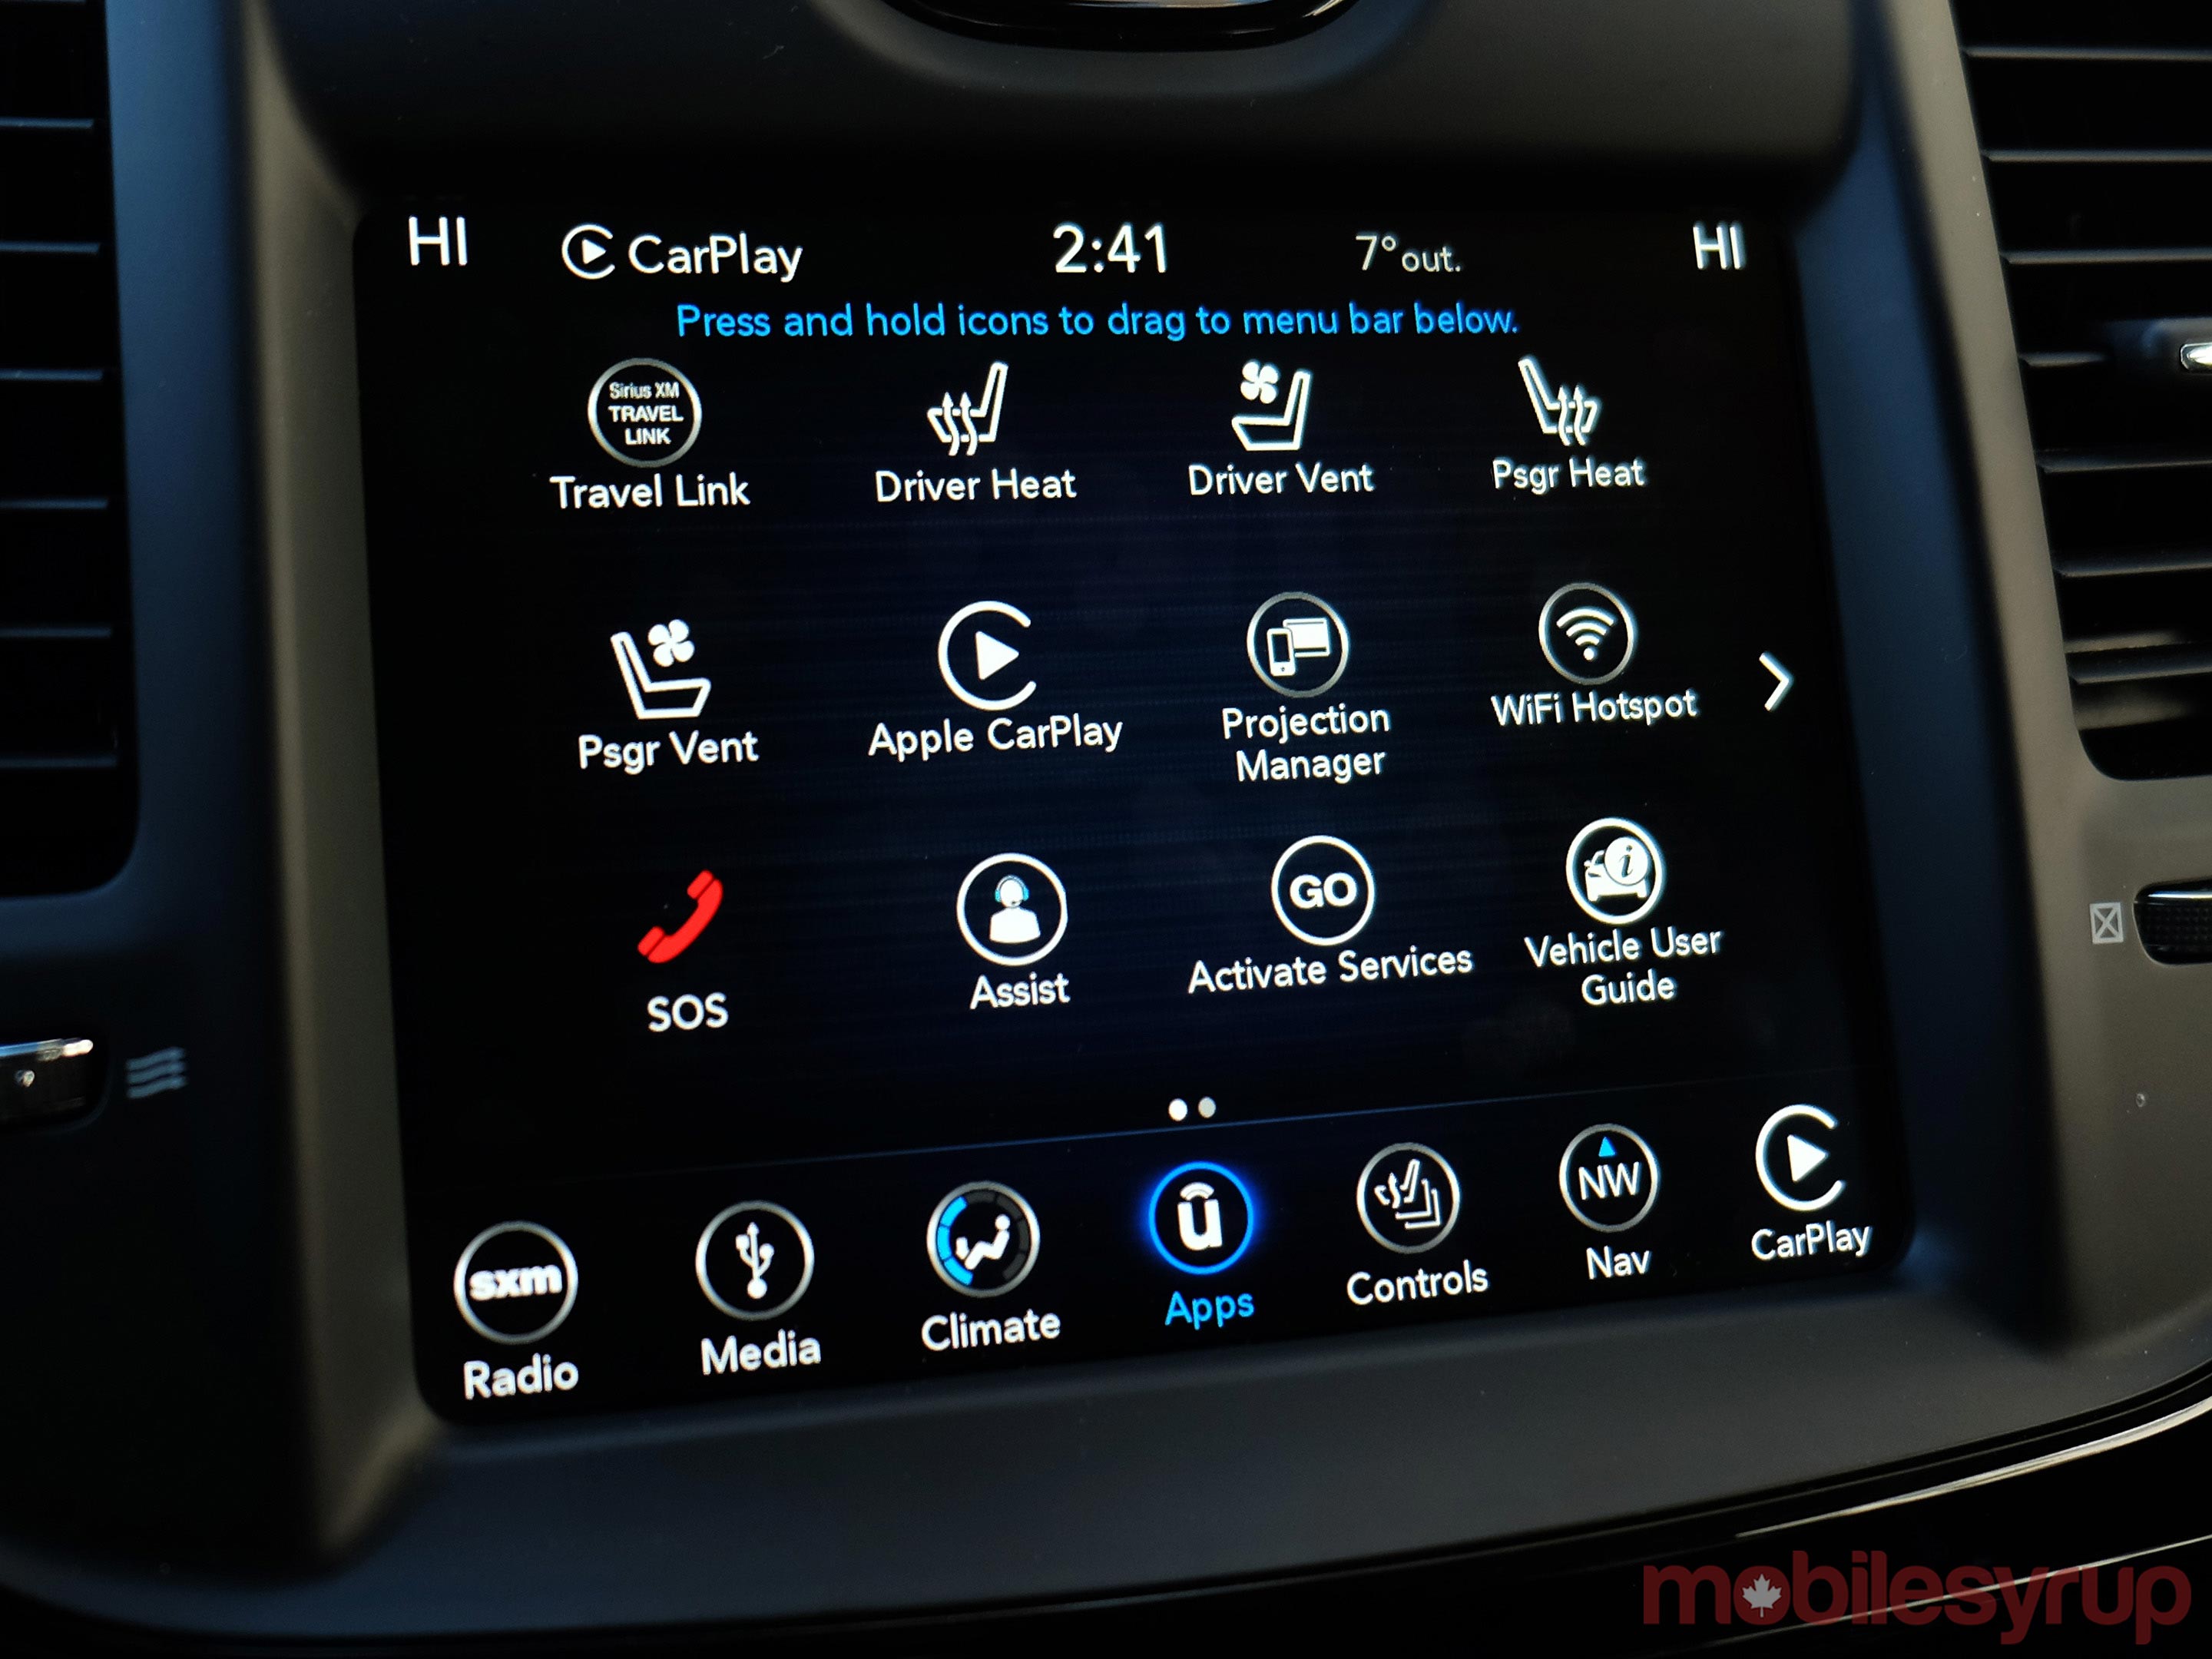 2018 Chrysler Uconnect Review: Back and forth | MobileSyrup